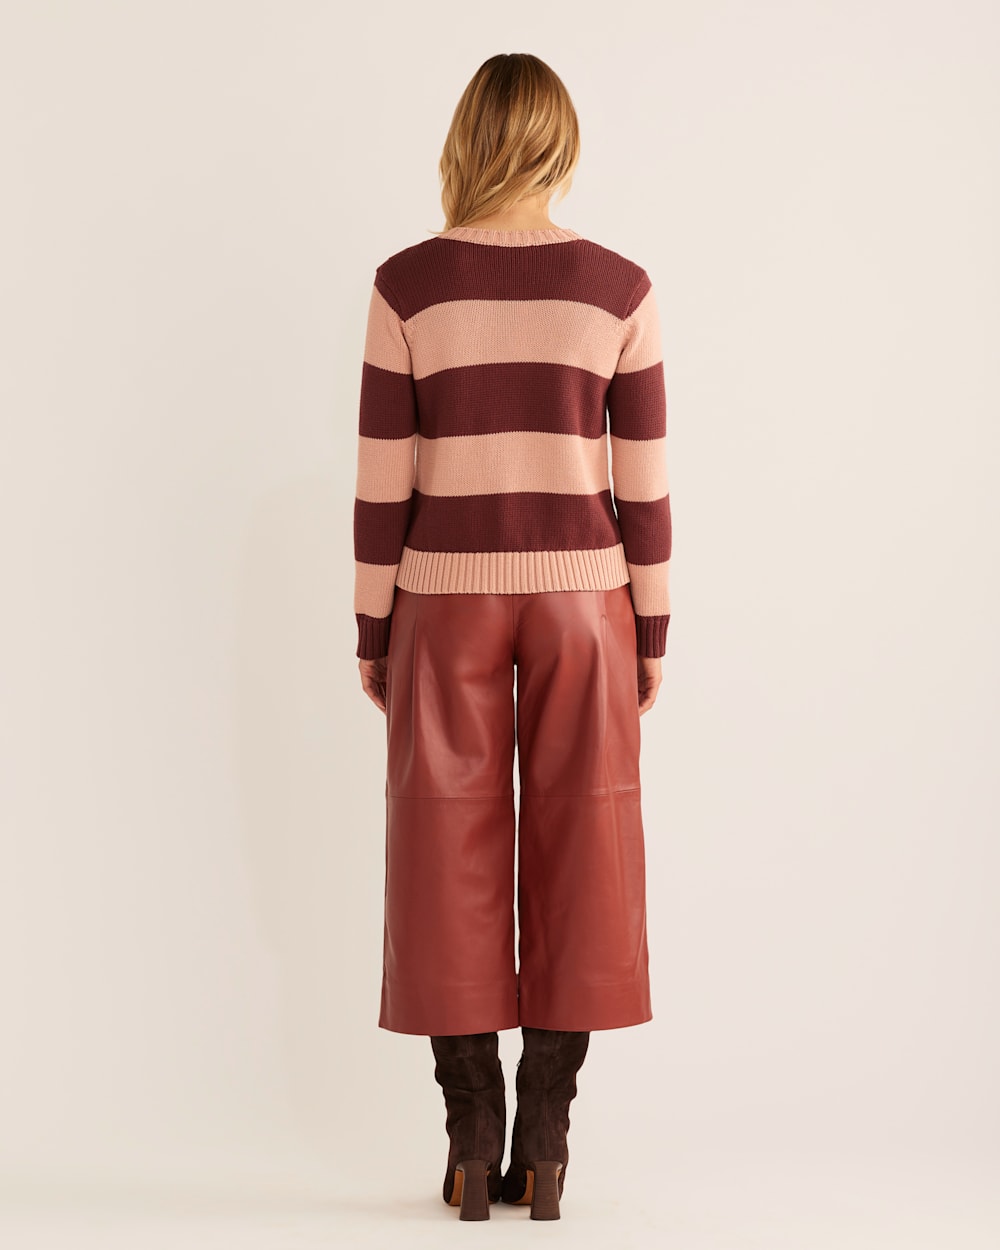 ALTERNATE VIEW OF WOMEN'S SELLWOOD STRIPE COTTON SWEATER IN MAHOGANY ROSE/BRANDIED PLUM image number 3